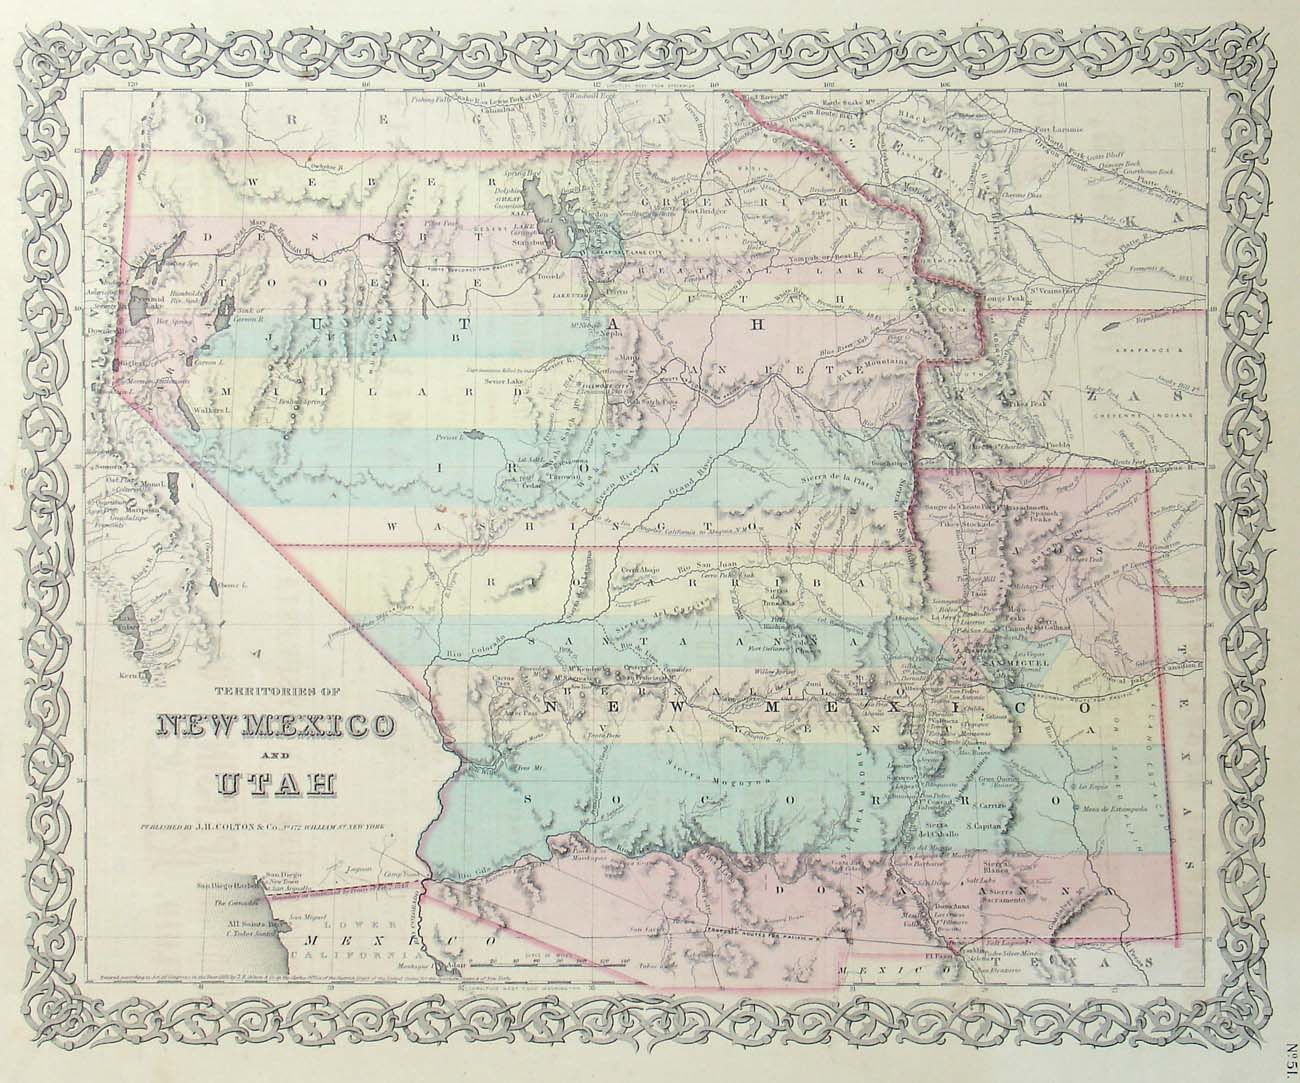 (Southwest) Territories of New Mexico and Utah